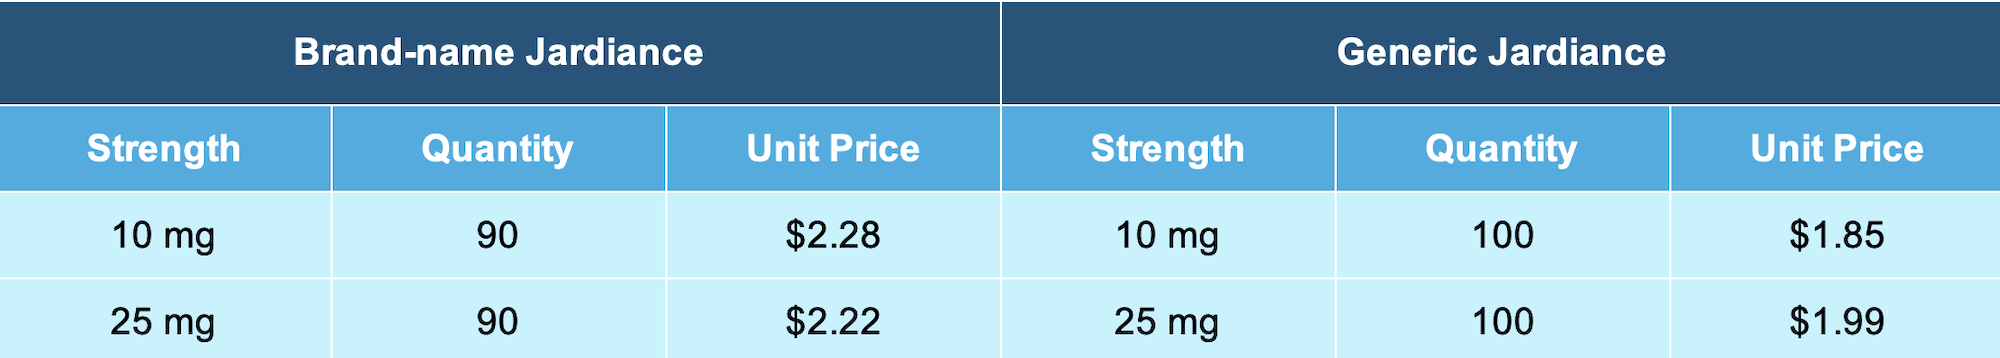 a table comparing brand-name to generic Jardiance prices